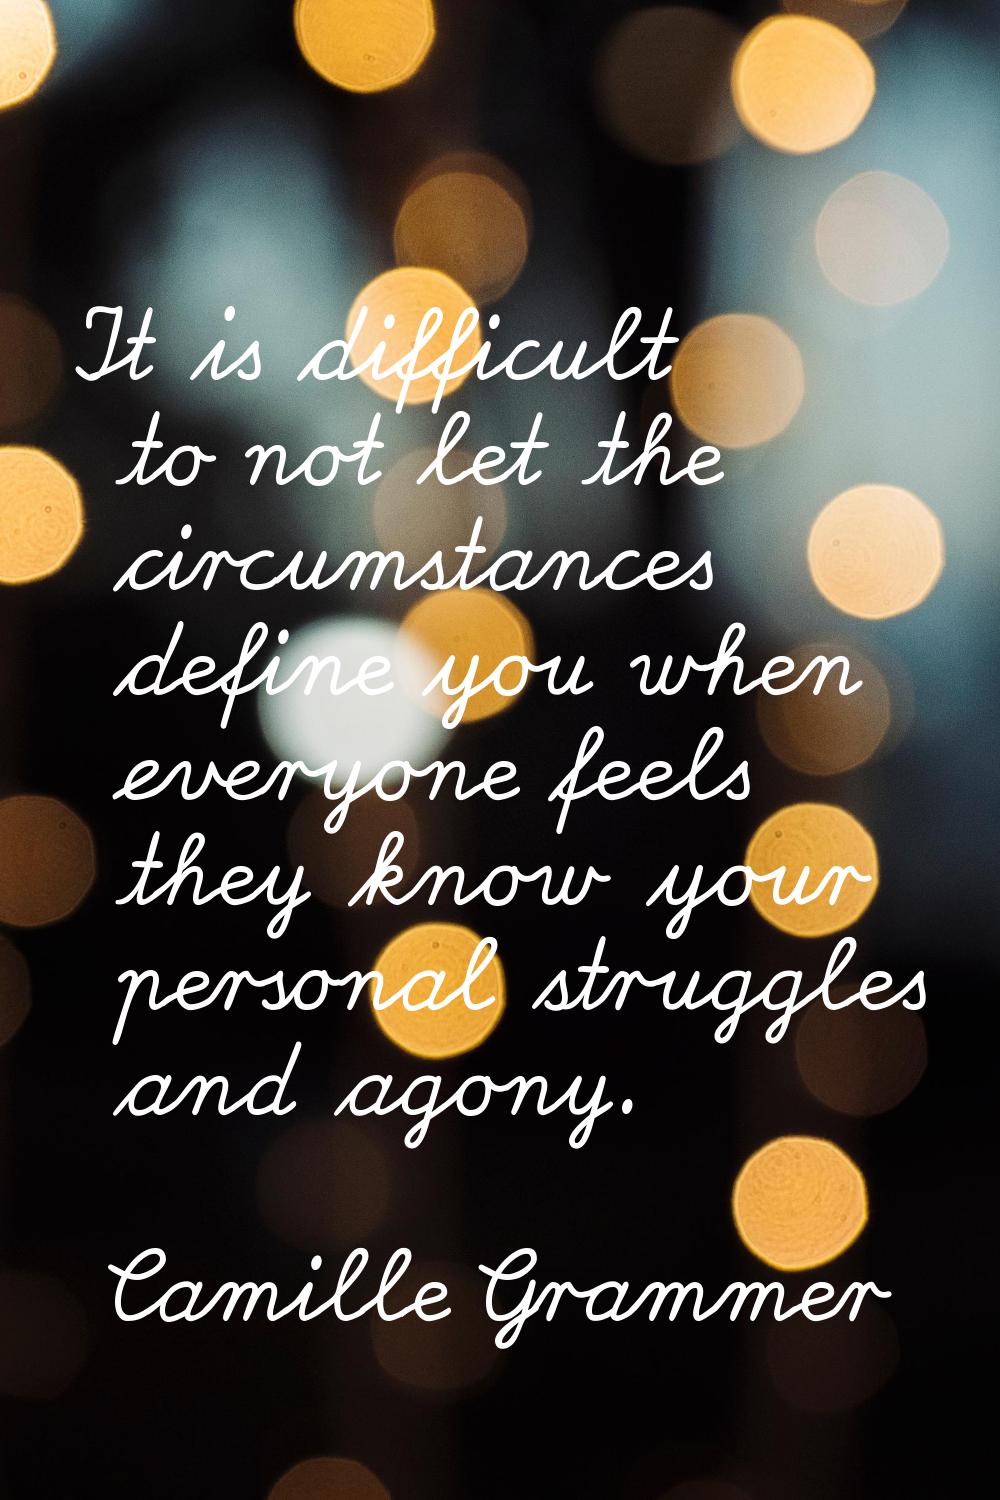 It is difficult to not let the circumstances define you when everyone feels they know your personal